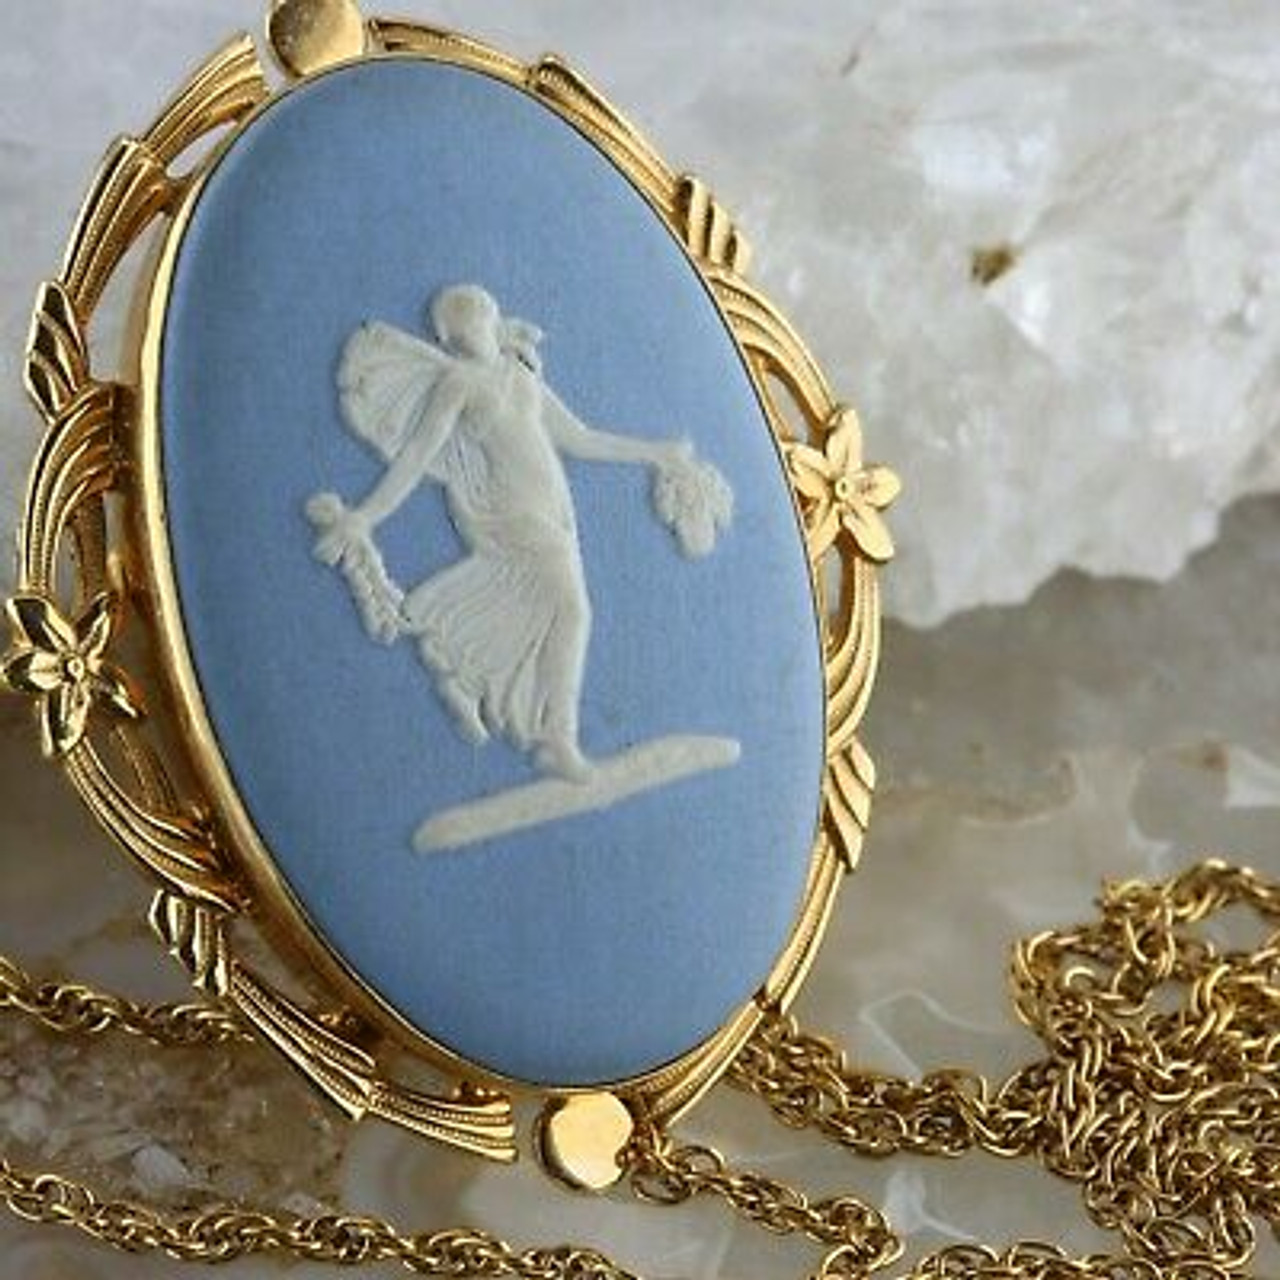 Vintage Wedgewood Pin Pendant Necklace with 26" Chain Gold Filled Circa  1960 - Colonial Trading Company